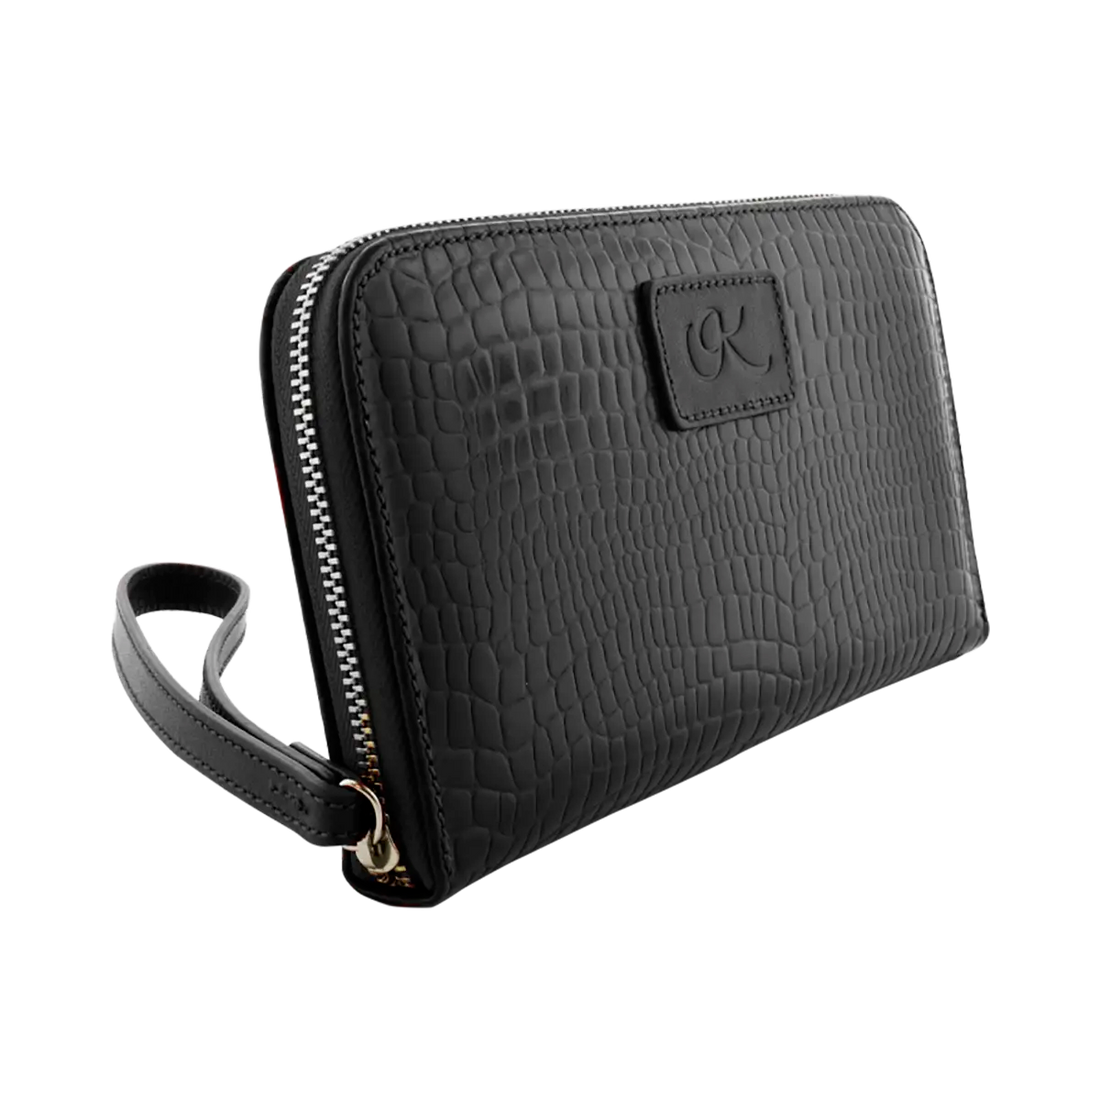 largeblack leather wallet with hand strap. Fashion Accessories for women shop in San Diego, CA.